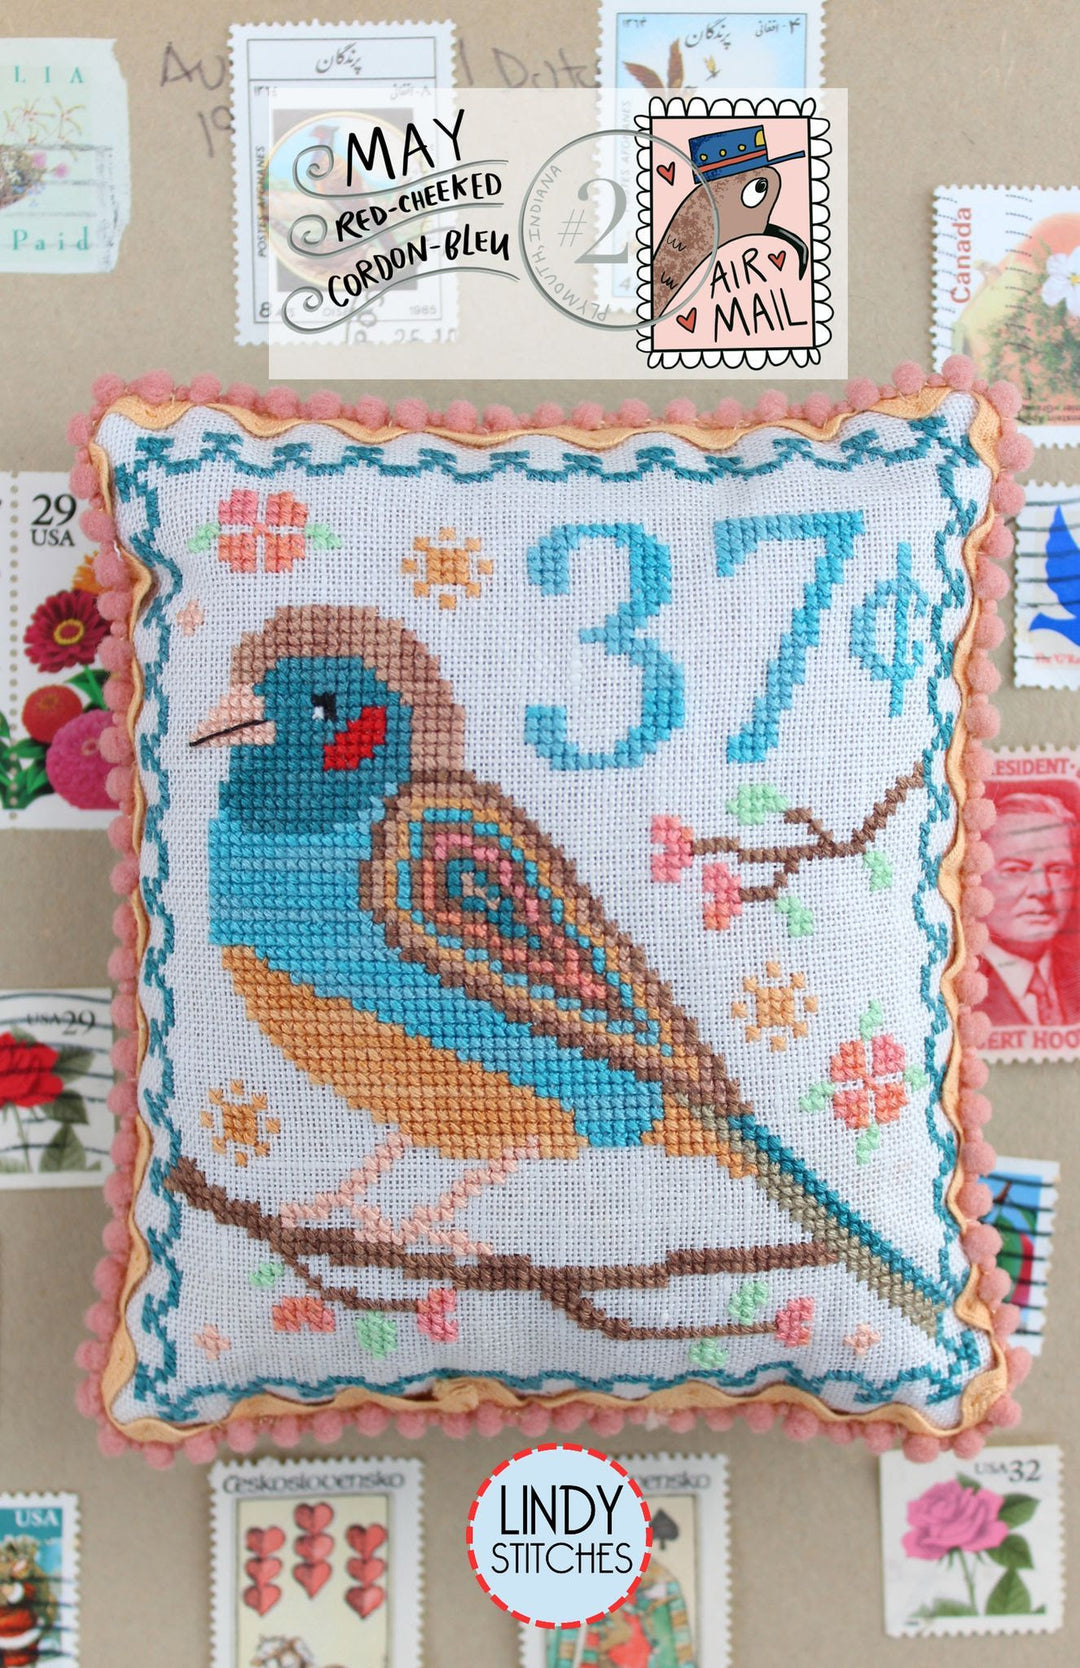 Air Mail May - Red-Cheeked Cordon Bleu  | Lindy Stitches